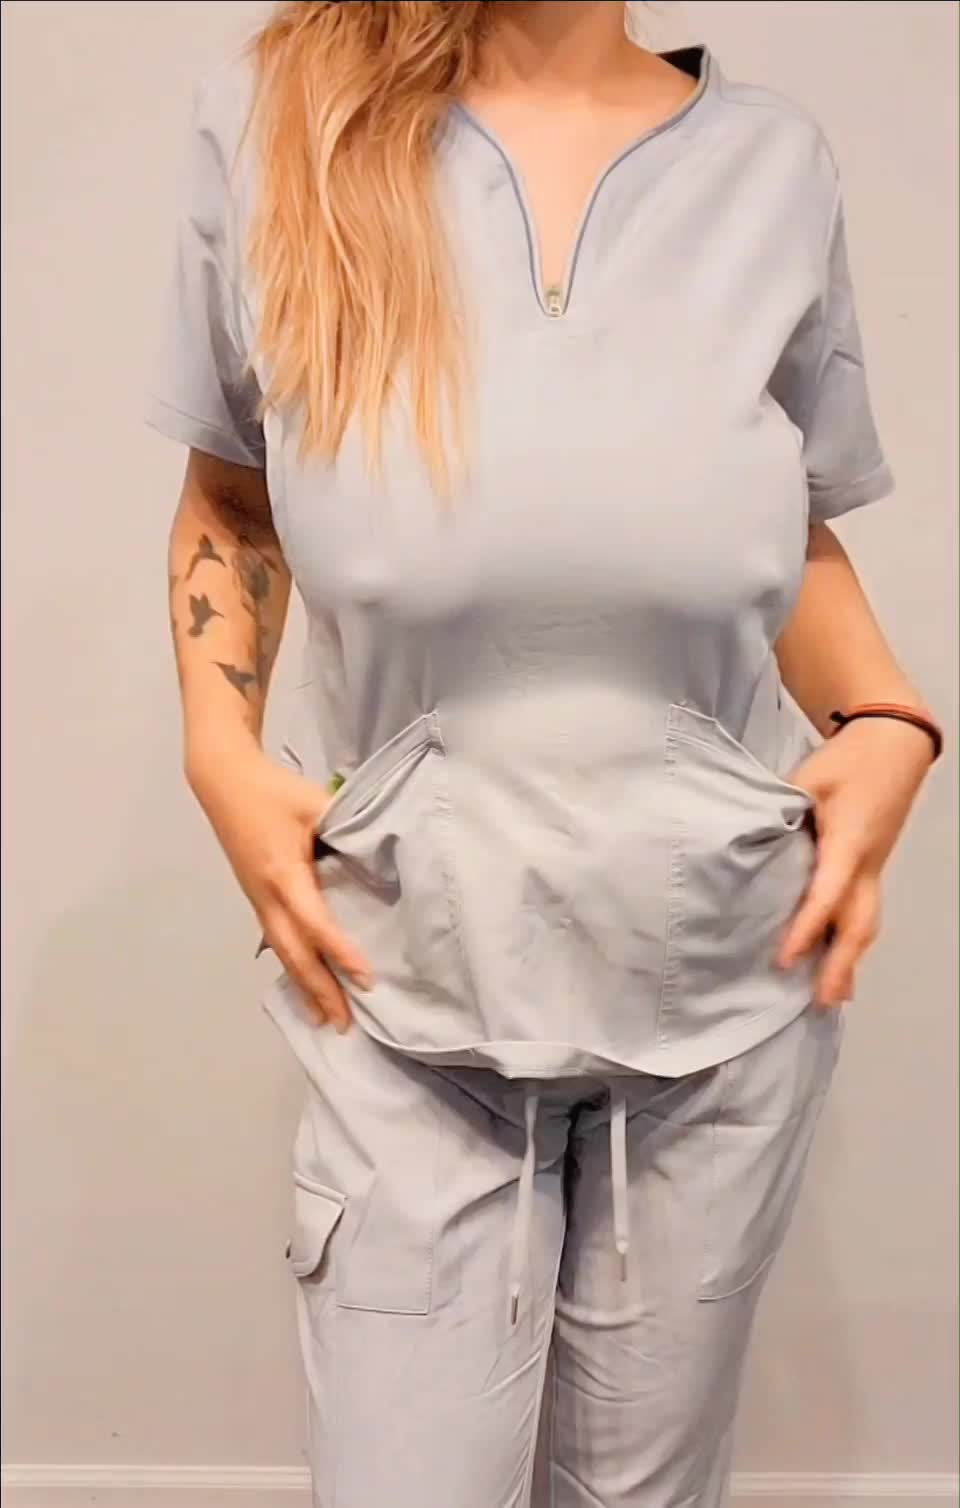 Nurse! Lol I would hear that a lot more if I work braless : video clip